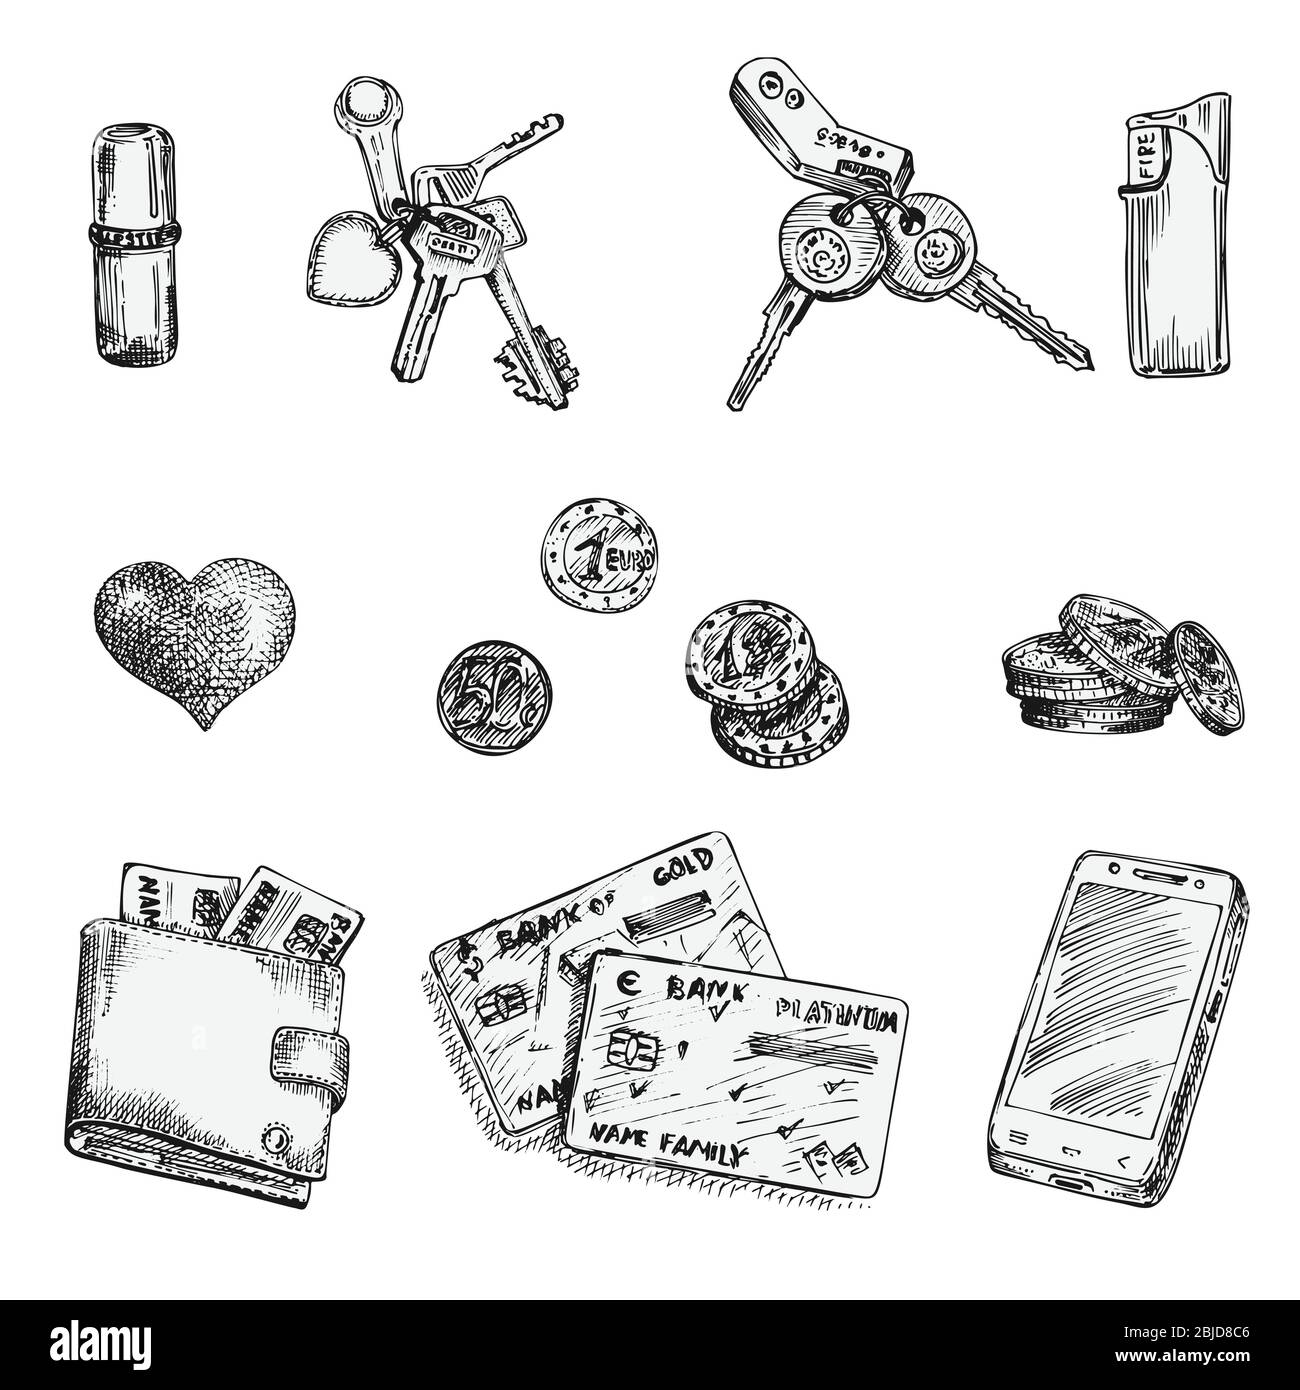 Set of ink sketch finance icons money, coins, wallet, credit cards, heart, keys, lipstick, lighter isolated on white background, Financial markets Stock Vector